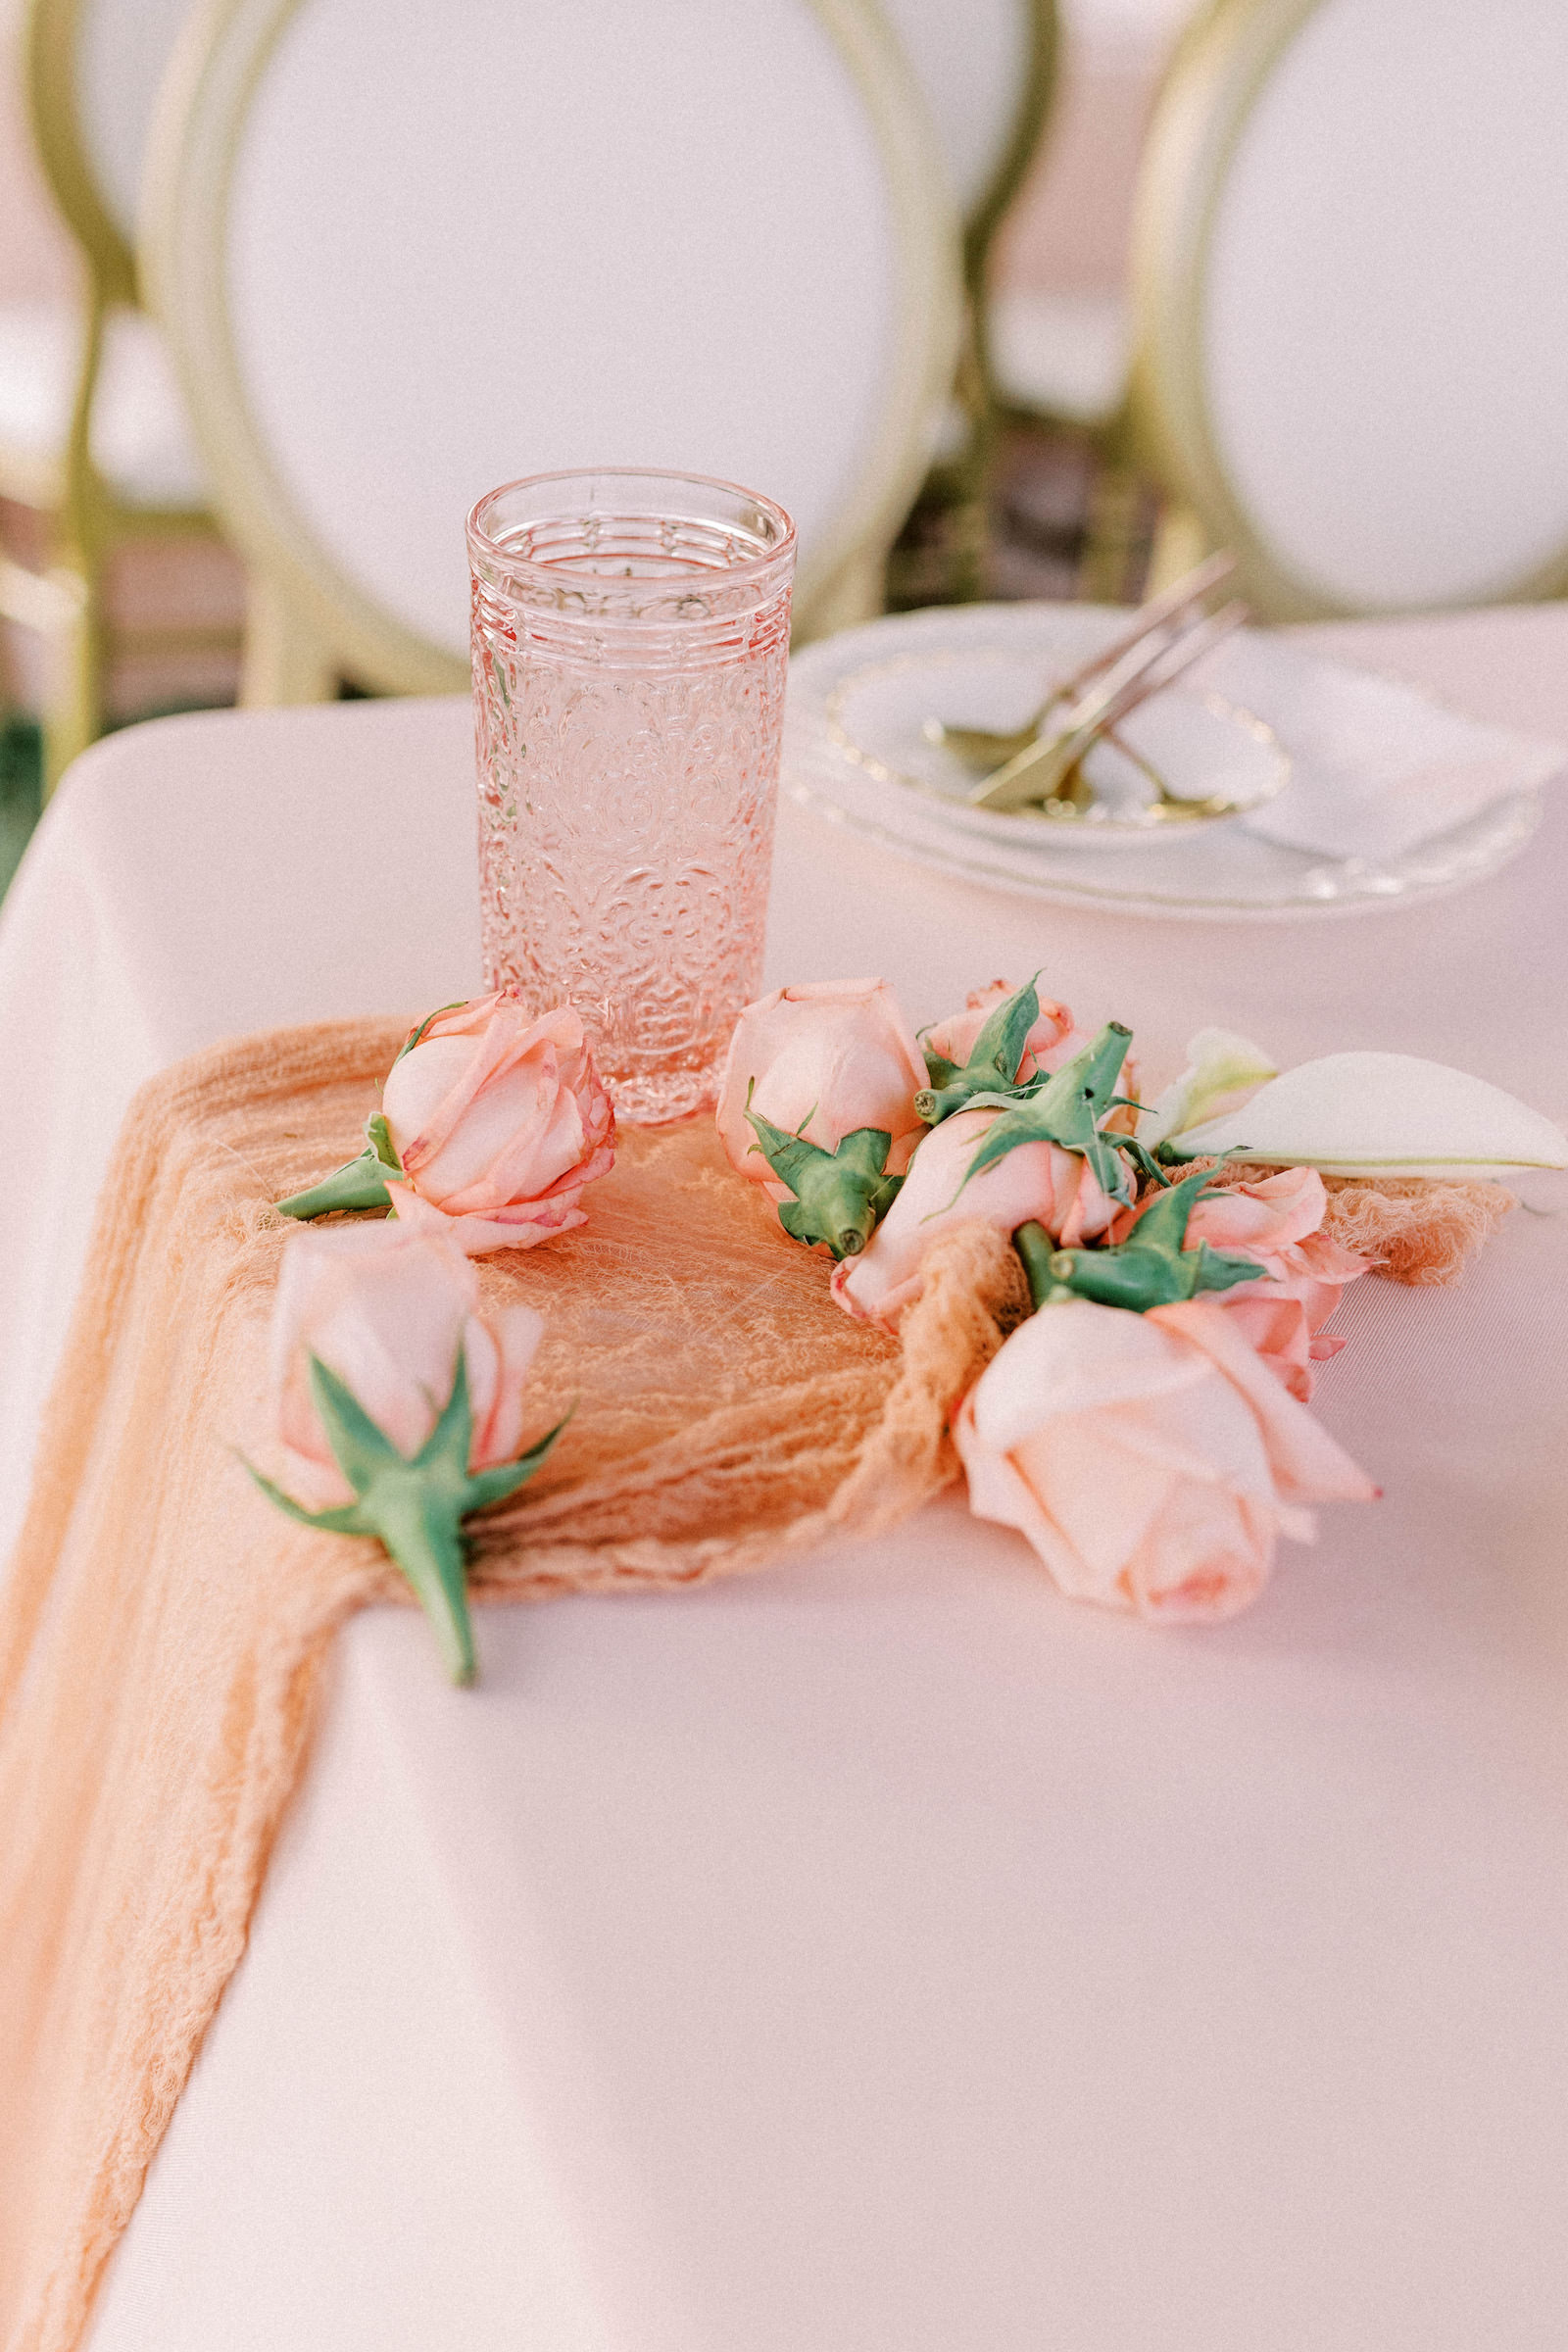 Garden Whimsical Wedding Reception Decor, Blush Pink Table Linen, Coral Orange Cheese Cloth Table Runner, Pink Roses, Pink Vintage Glassware | Kate Ryan Event Rentals